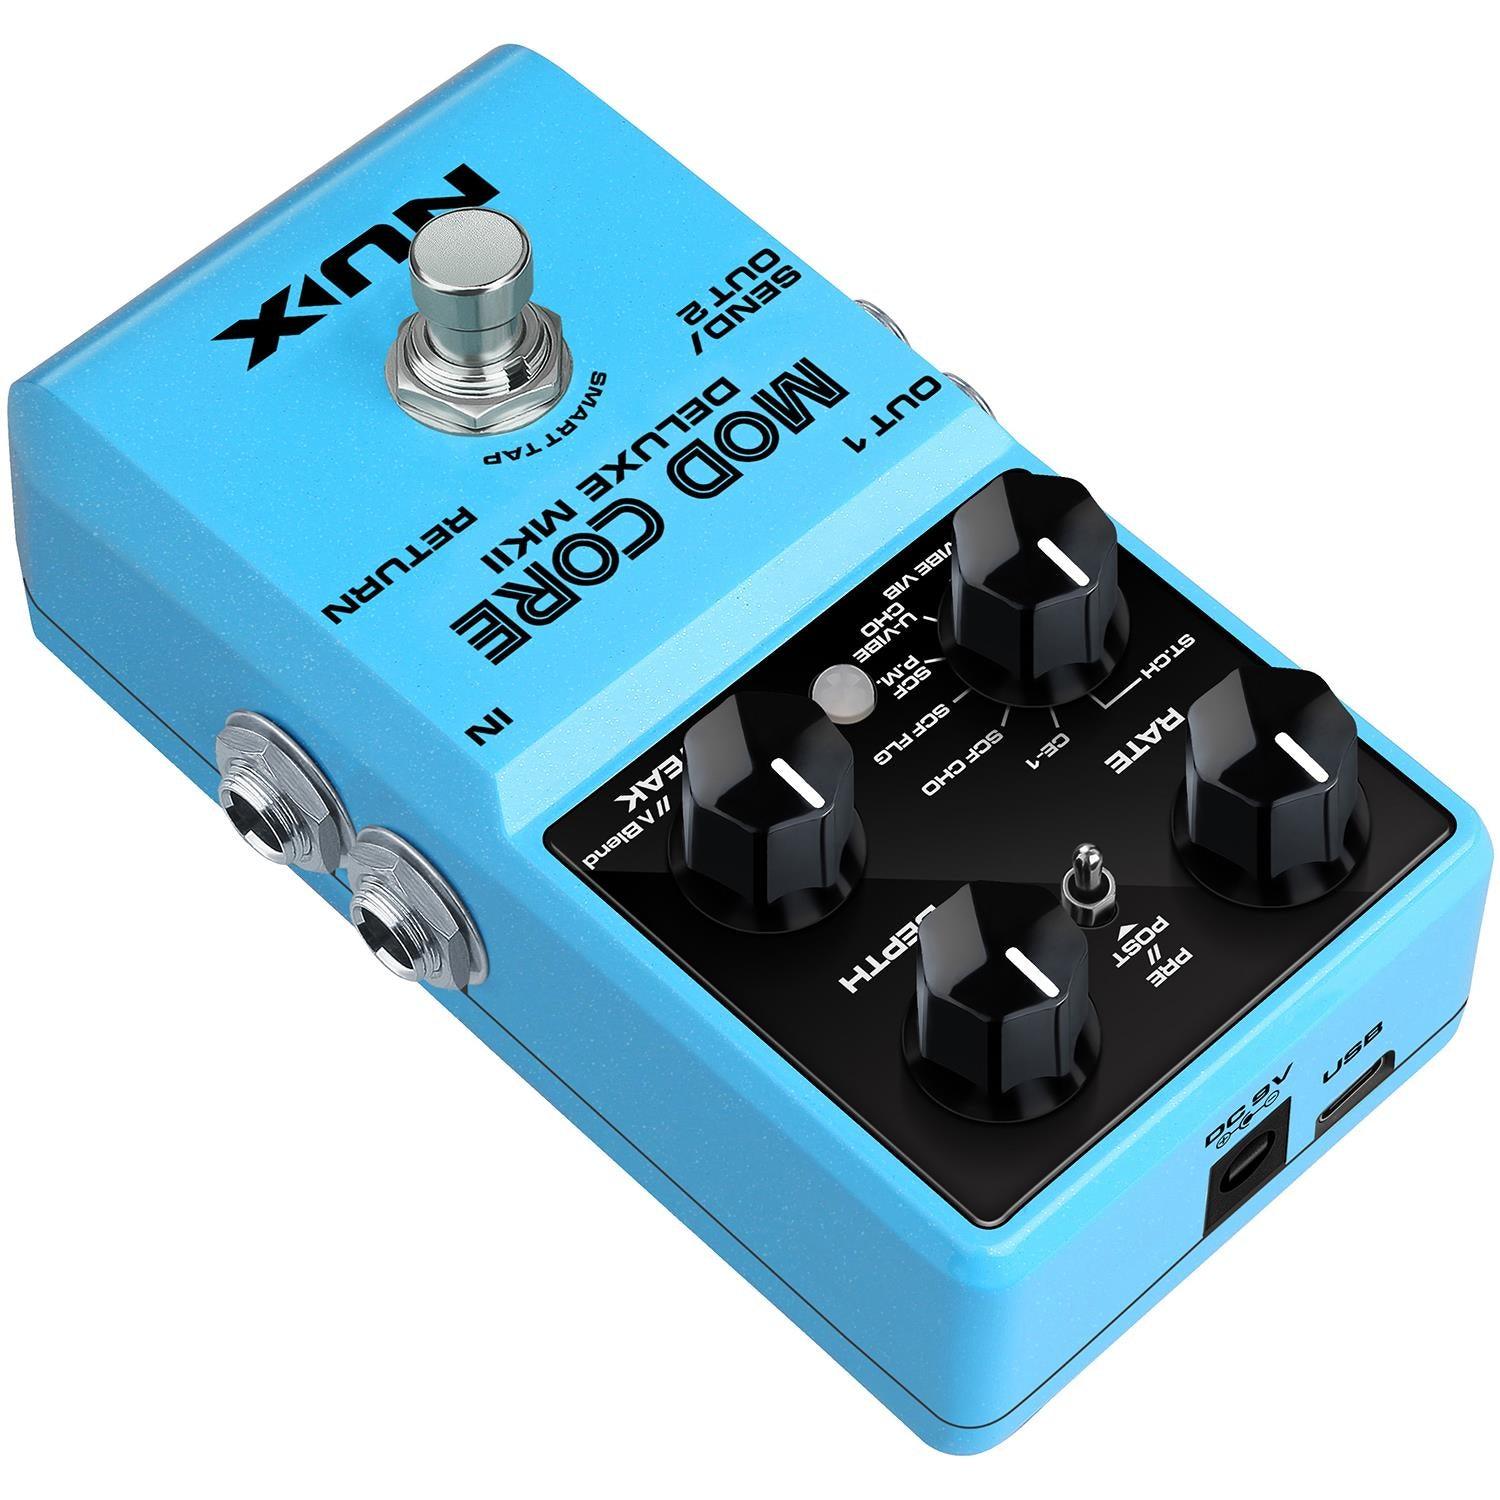 NUX Mod Core Deluxe mkII Modulation Pedal - DY Pro Audio